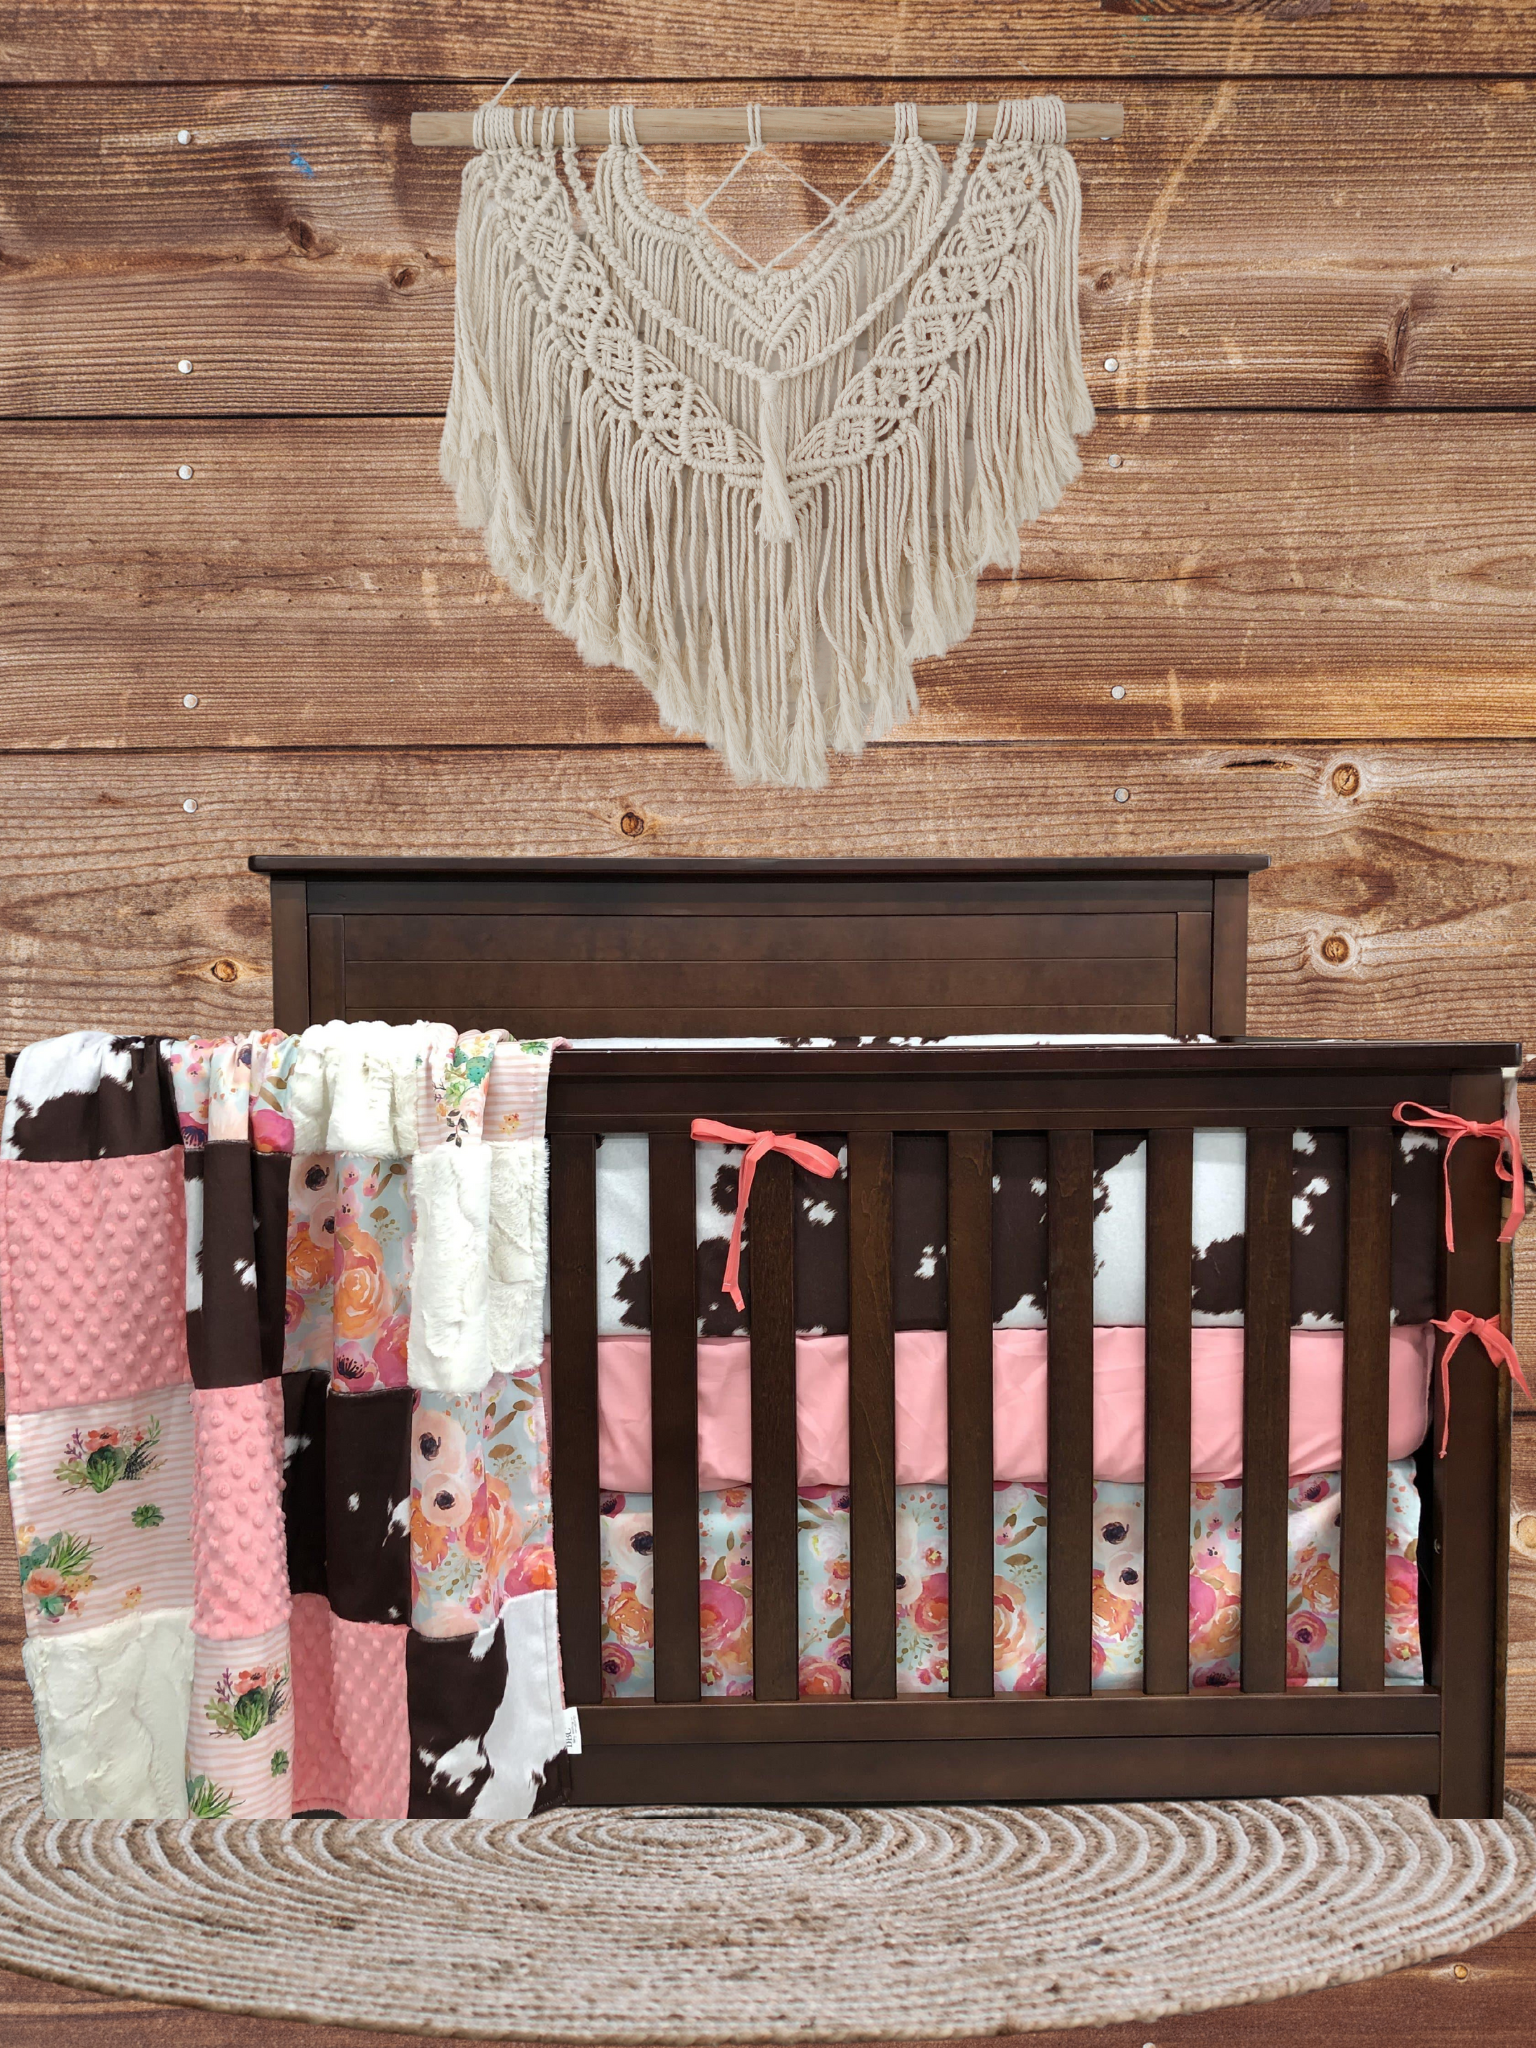 Custom Girl Crib Bedding - Cactus, Cowhide Minky, and Watercolor Floral Western Nursery Collection - DBC Baby Bedding Co 